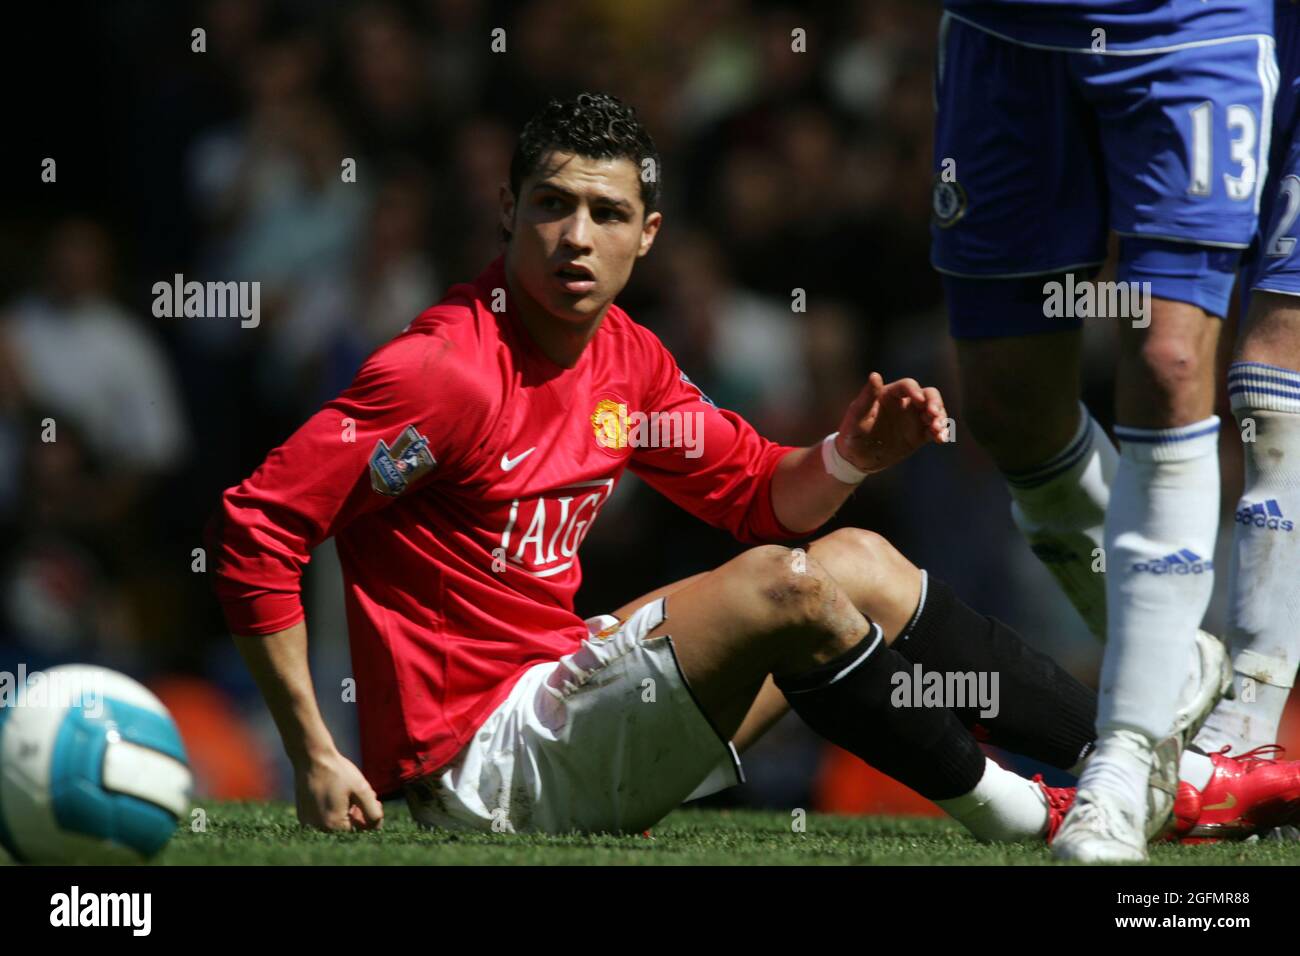 Chelsea contro Manchester United Premier League 26.4.08 Christiano Ronaldo Down Against chelsea pic by Gavin Rodgers/pixel 07917221968 Foto Stock